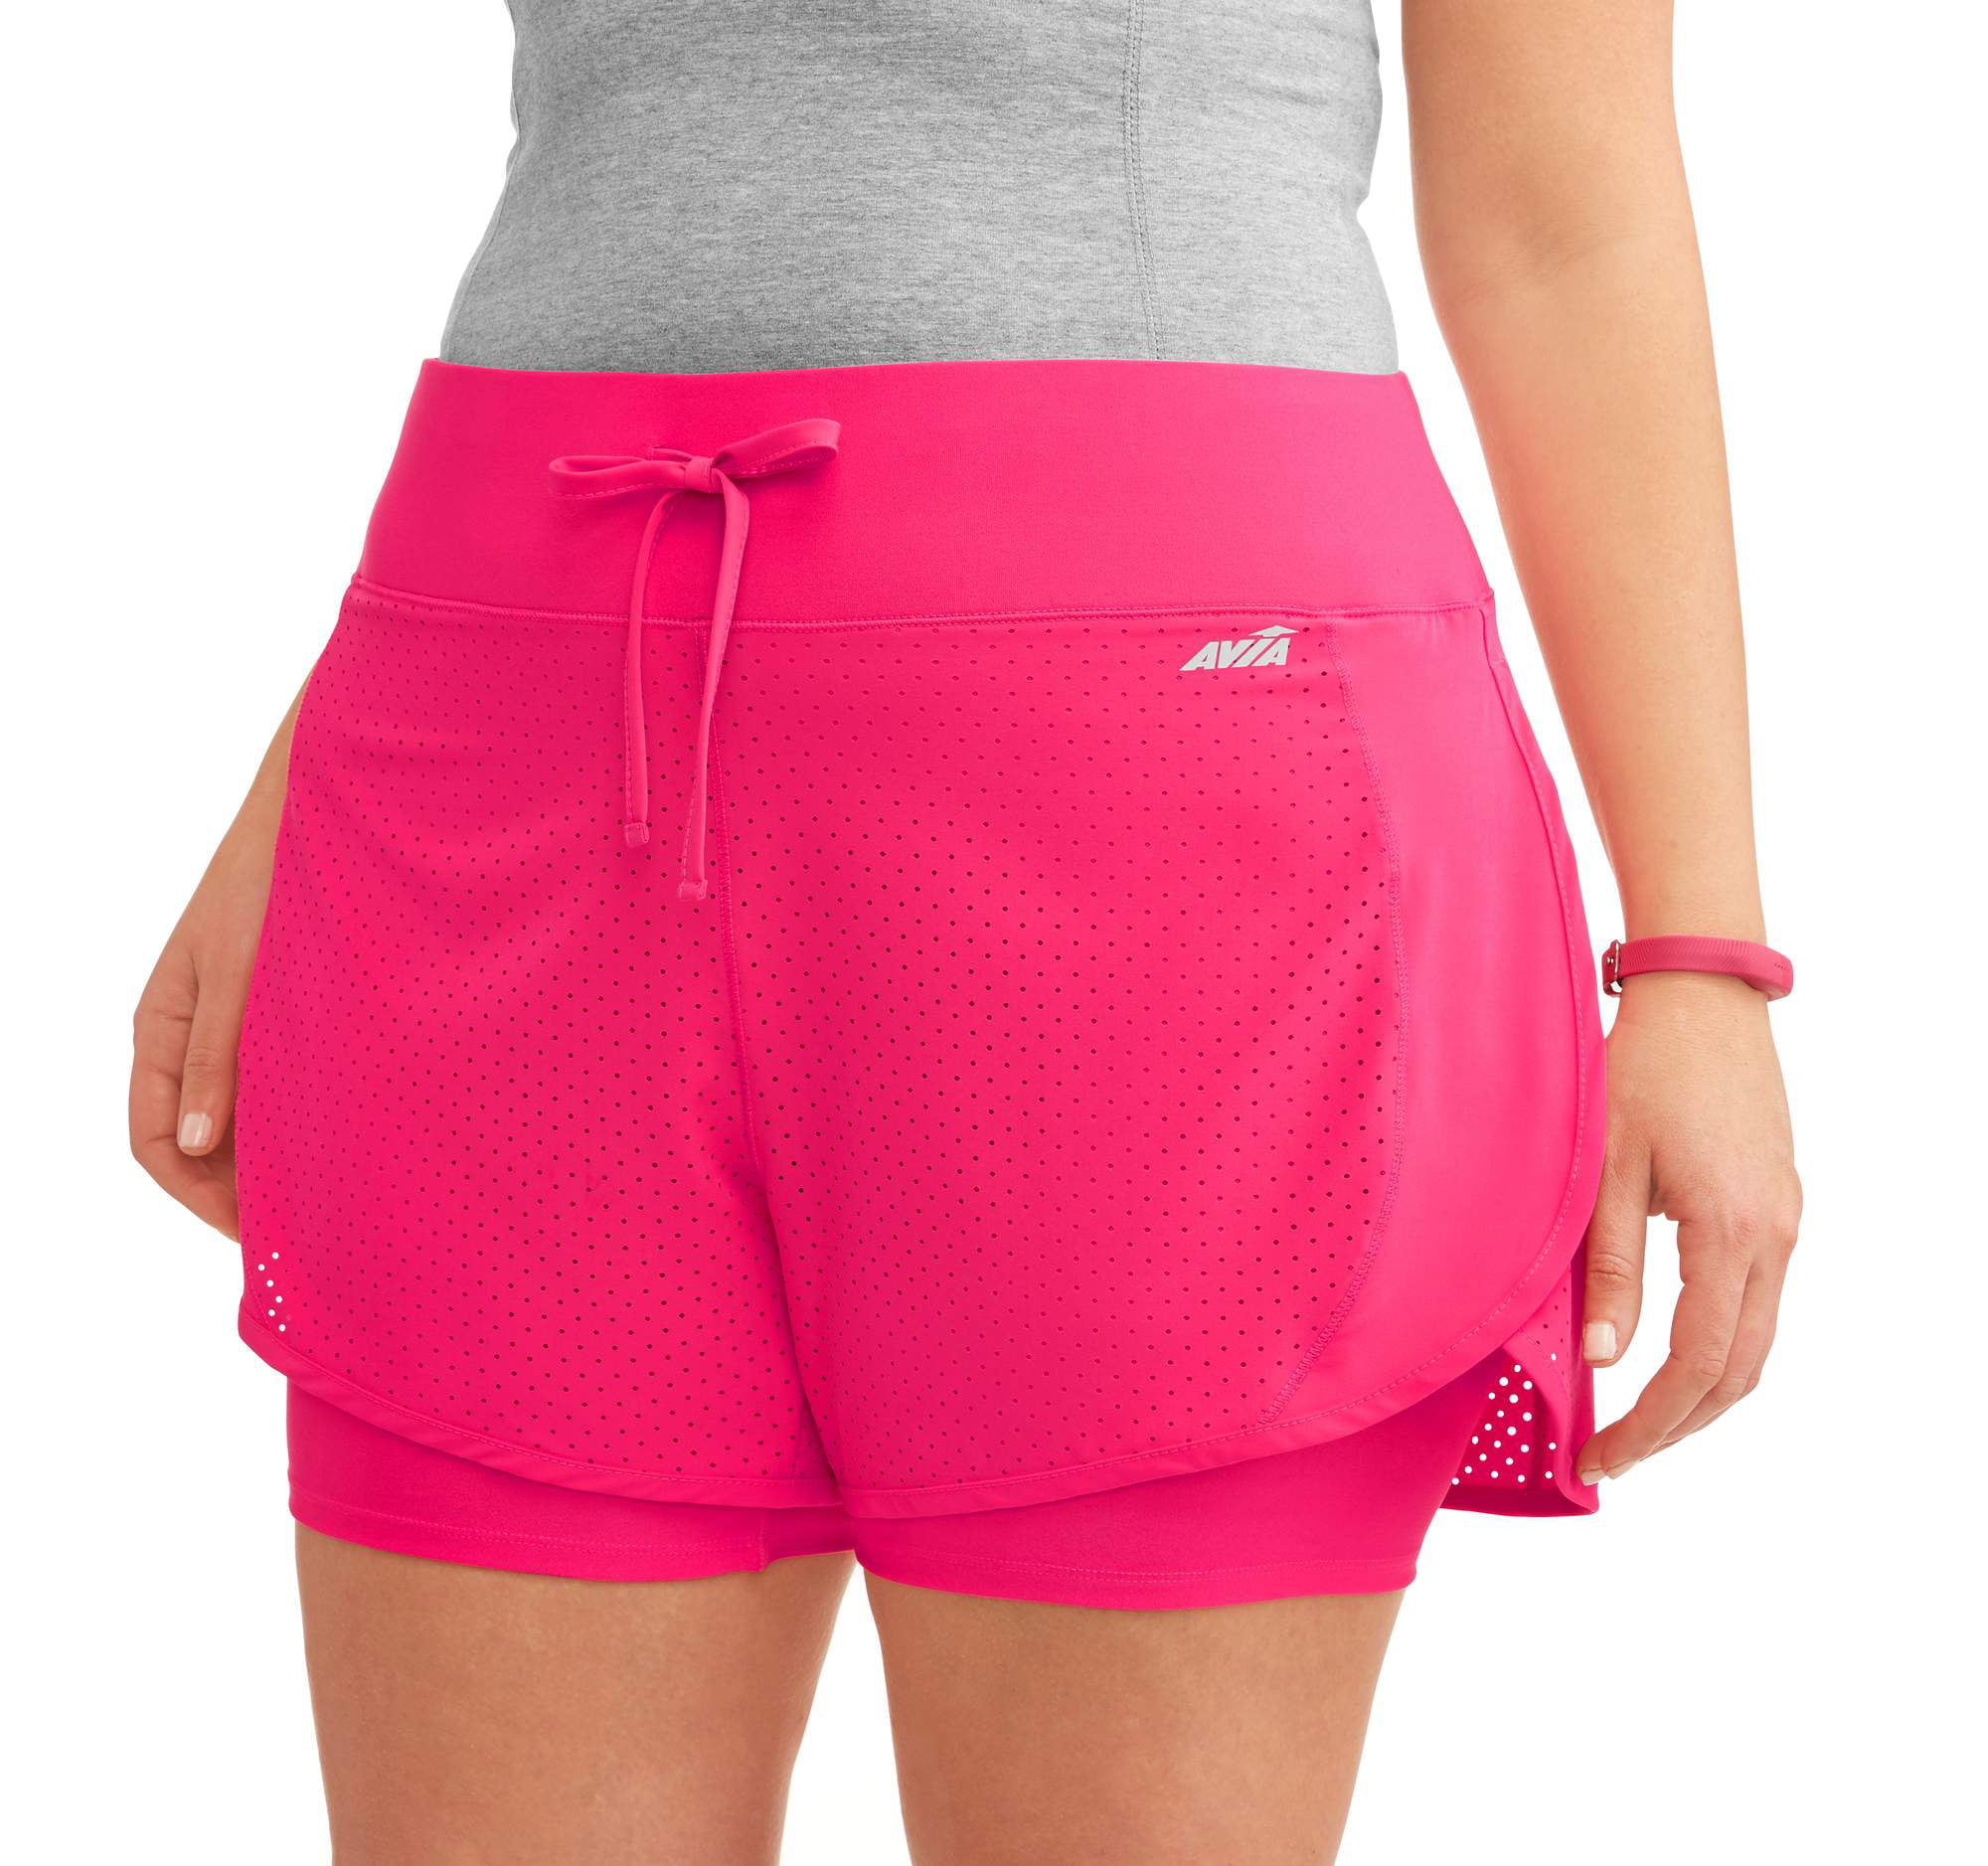 avia-women-s-plus-size-active-perforated-running-short-with-built-in-compression-shorts